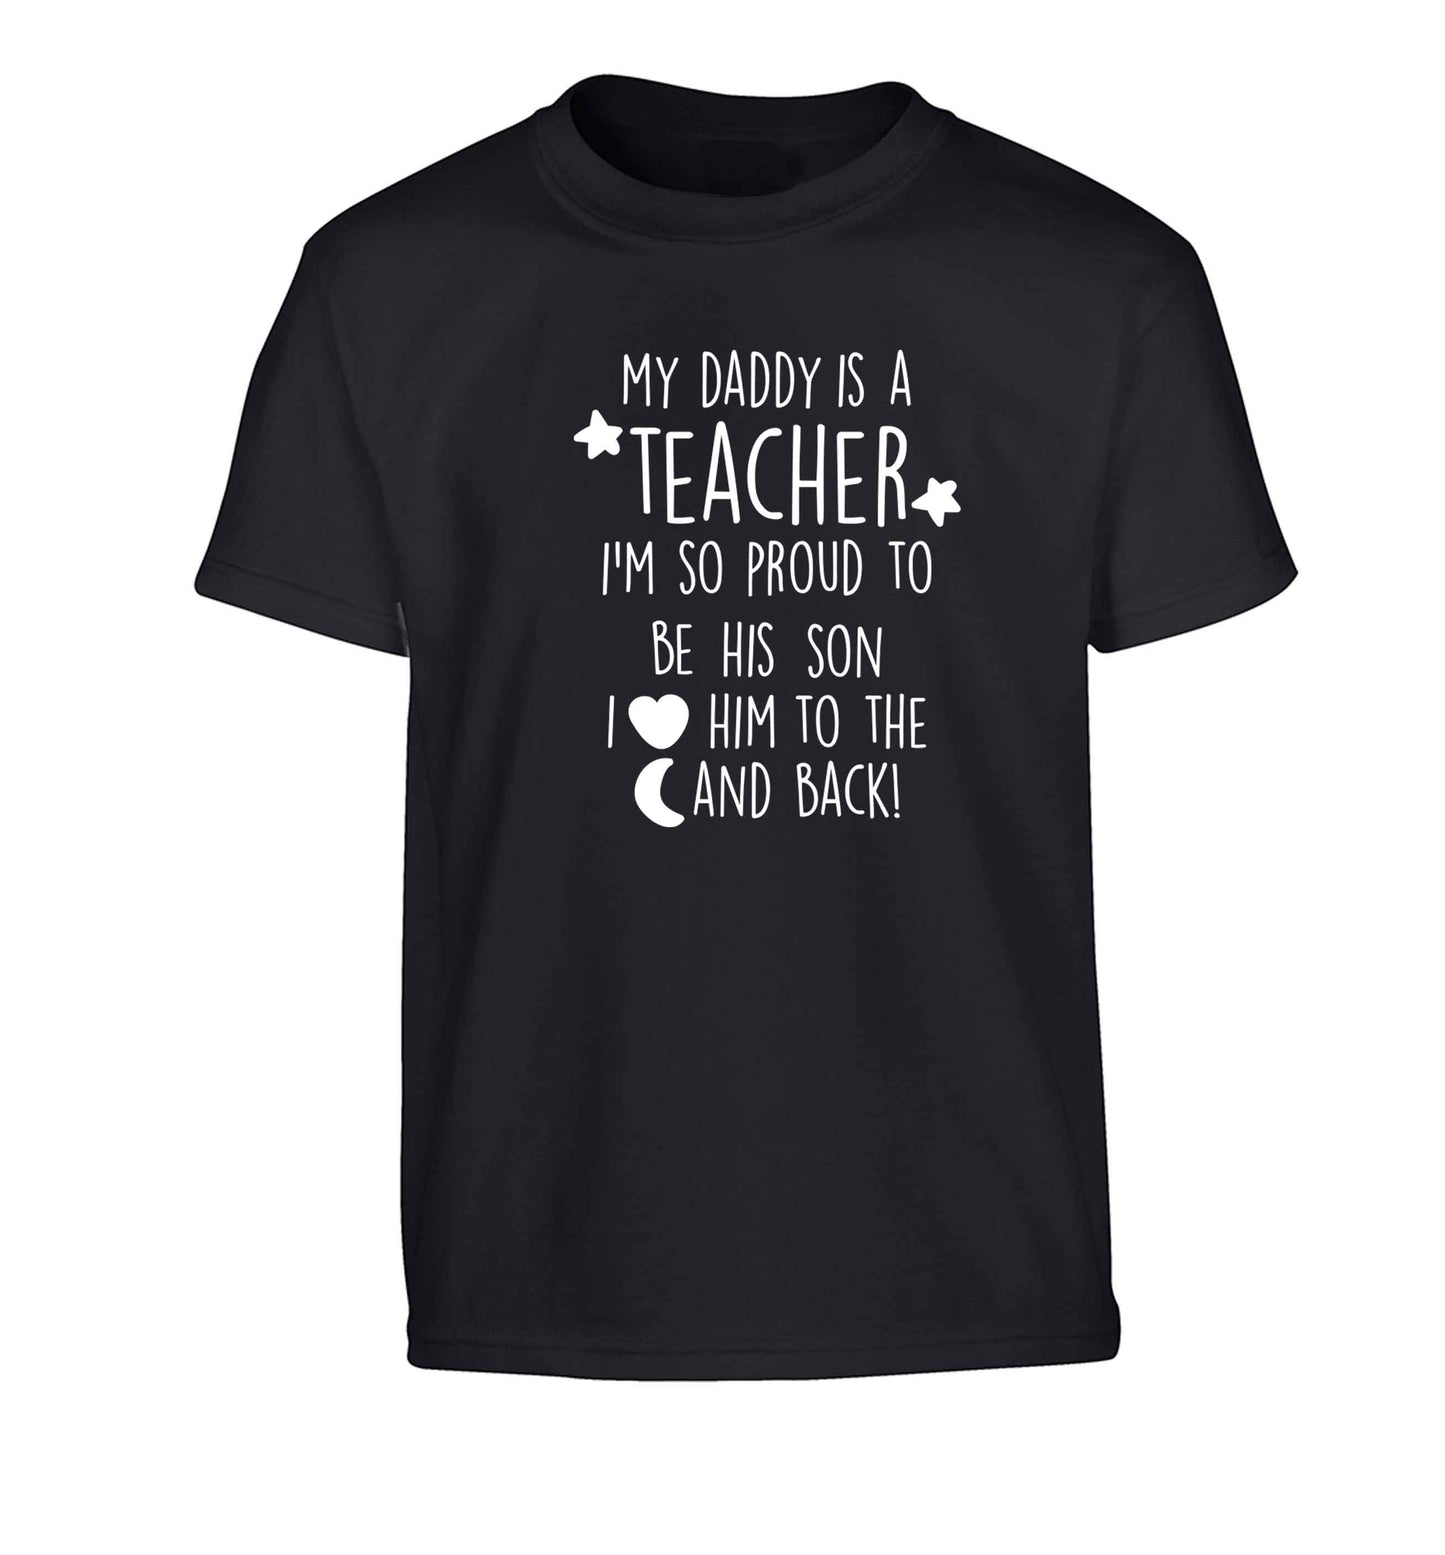 My daddy is a teacher I'm so proud to be his son I love her to the moon and back Children's black Tshirt 12-13 Years